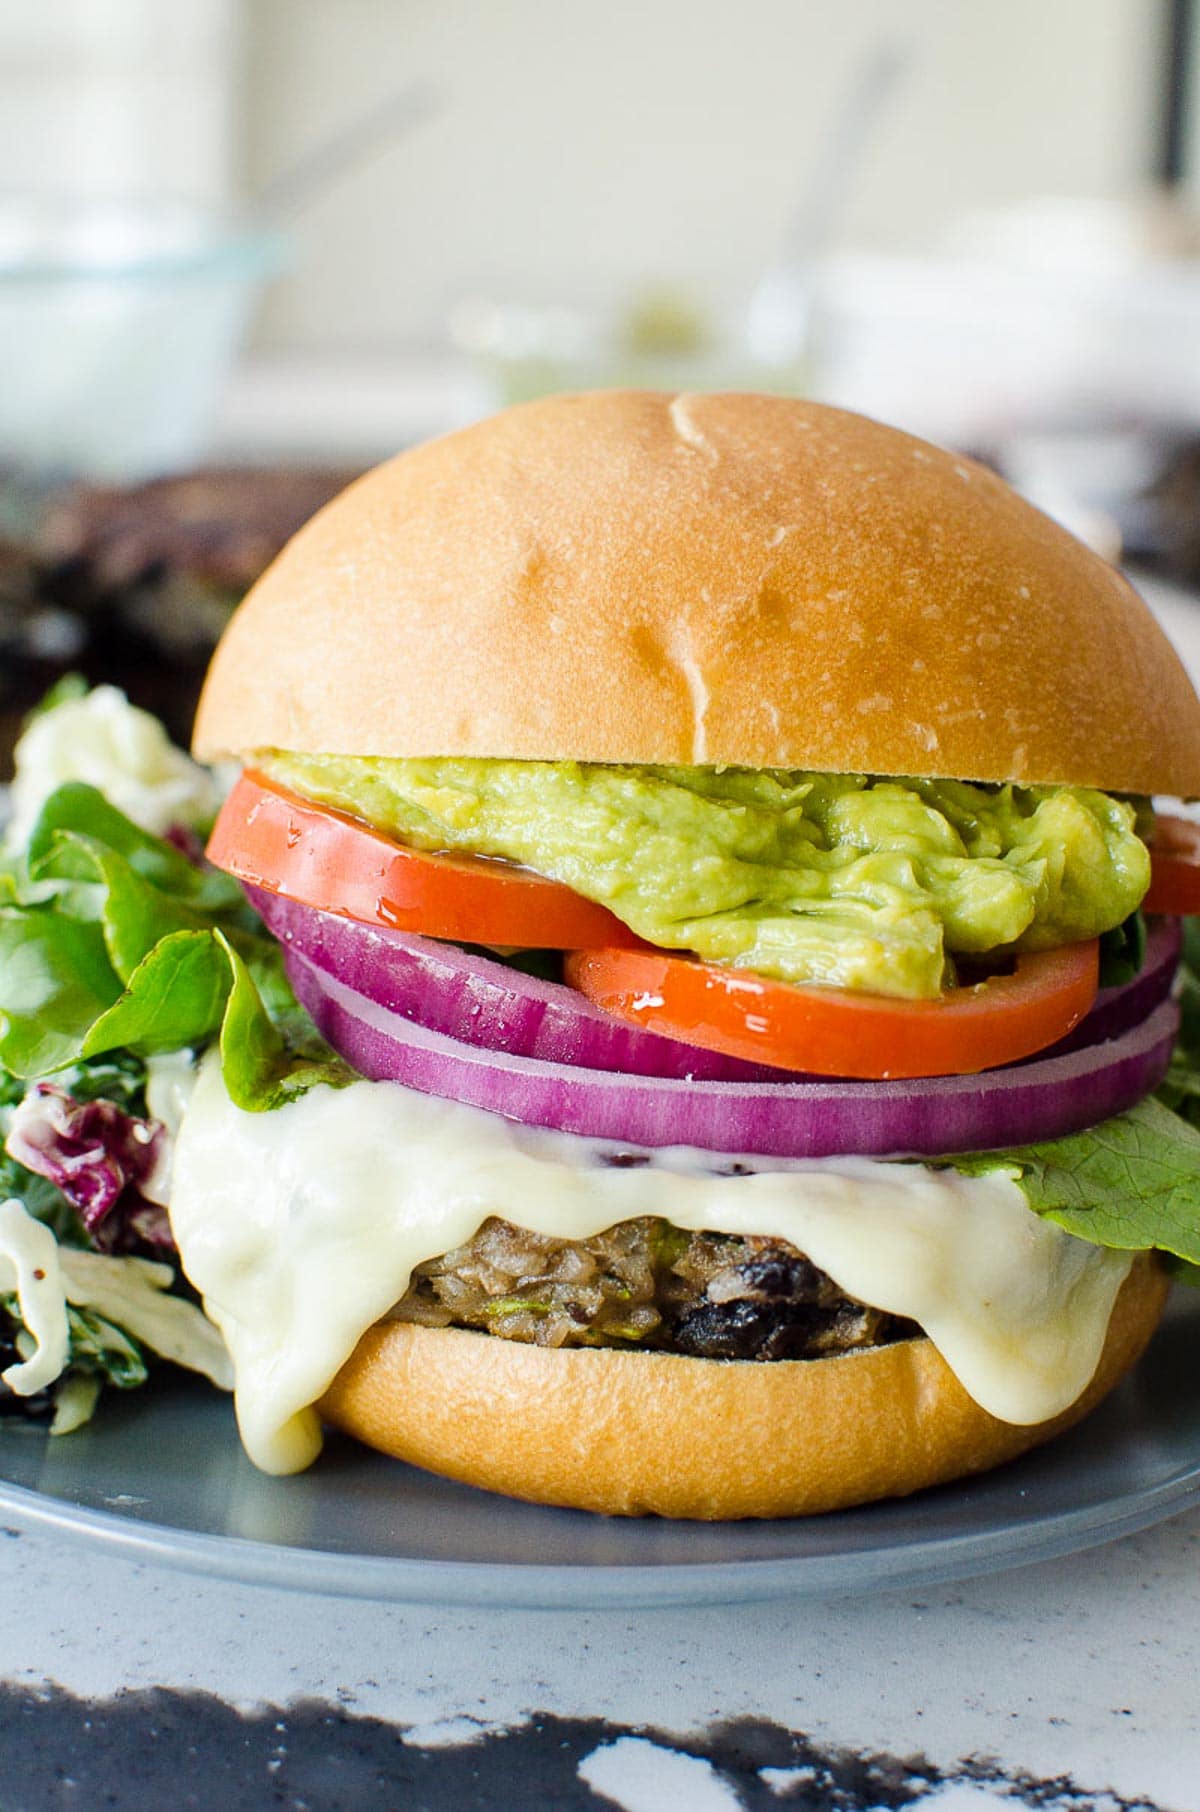 Healthy black bean burgers on bun with cheese, onion, tomato and guacamole.